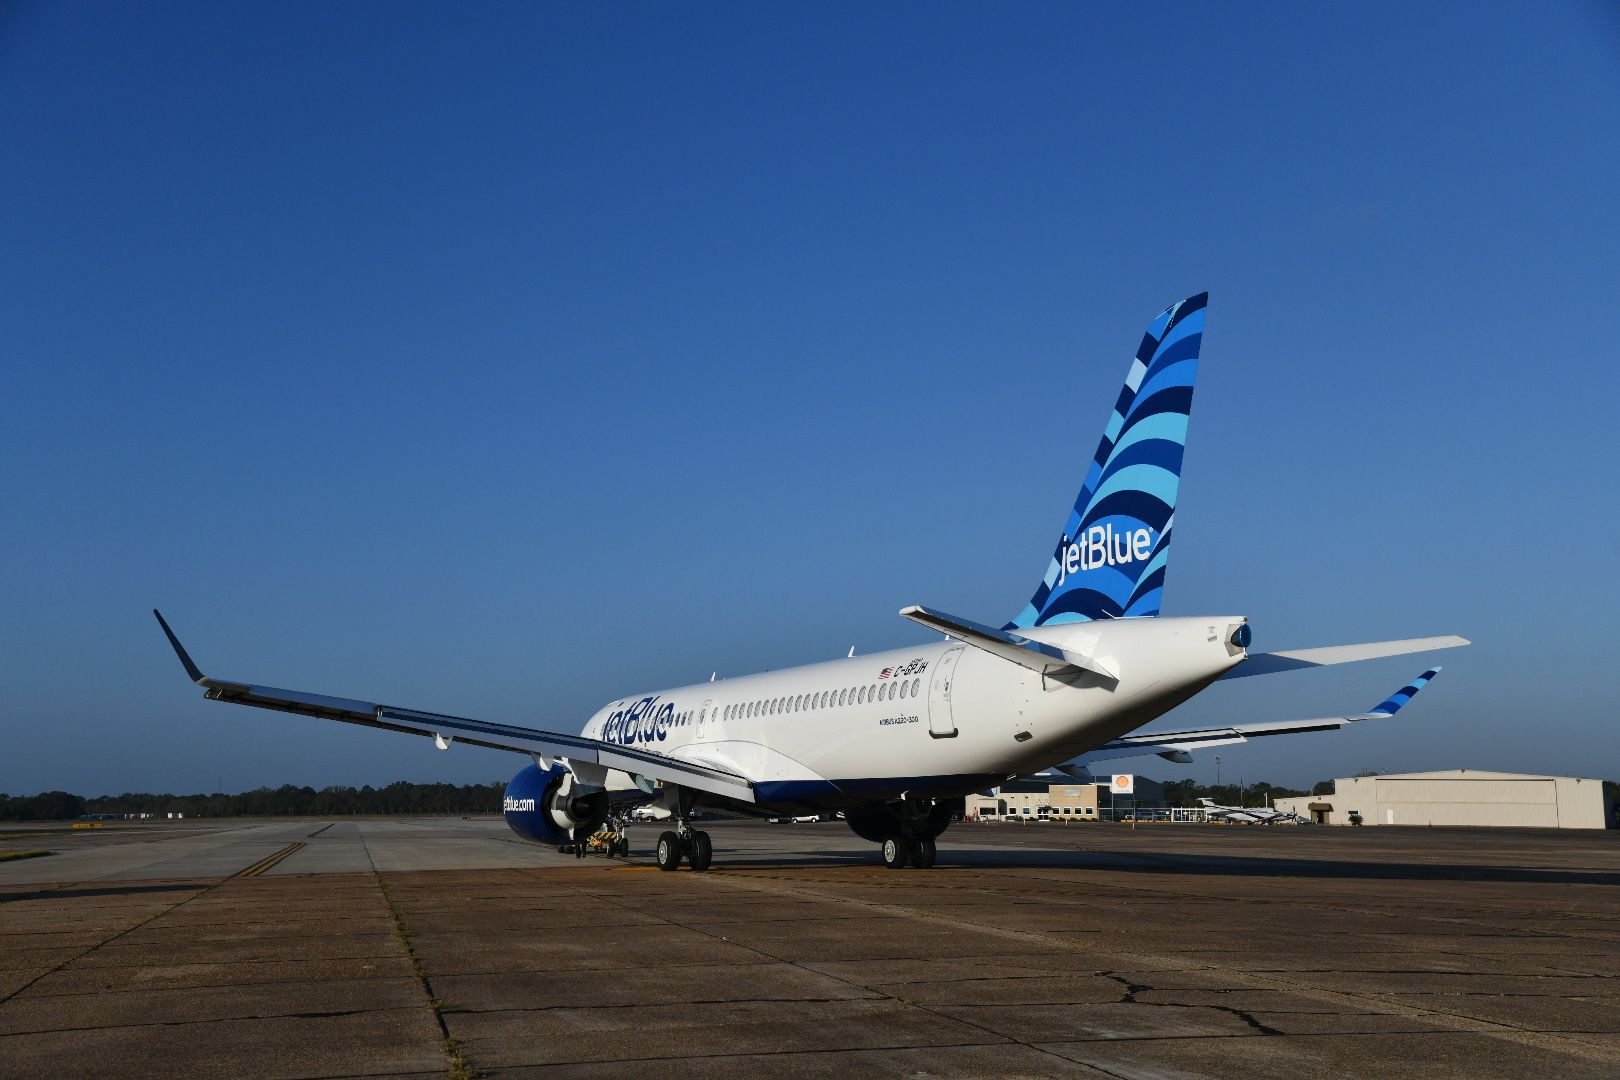 A JetBlue Airbus A220 parked at an airport